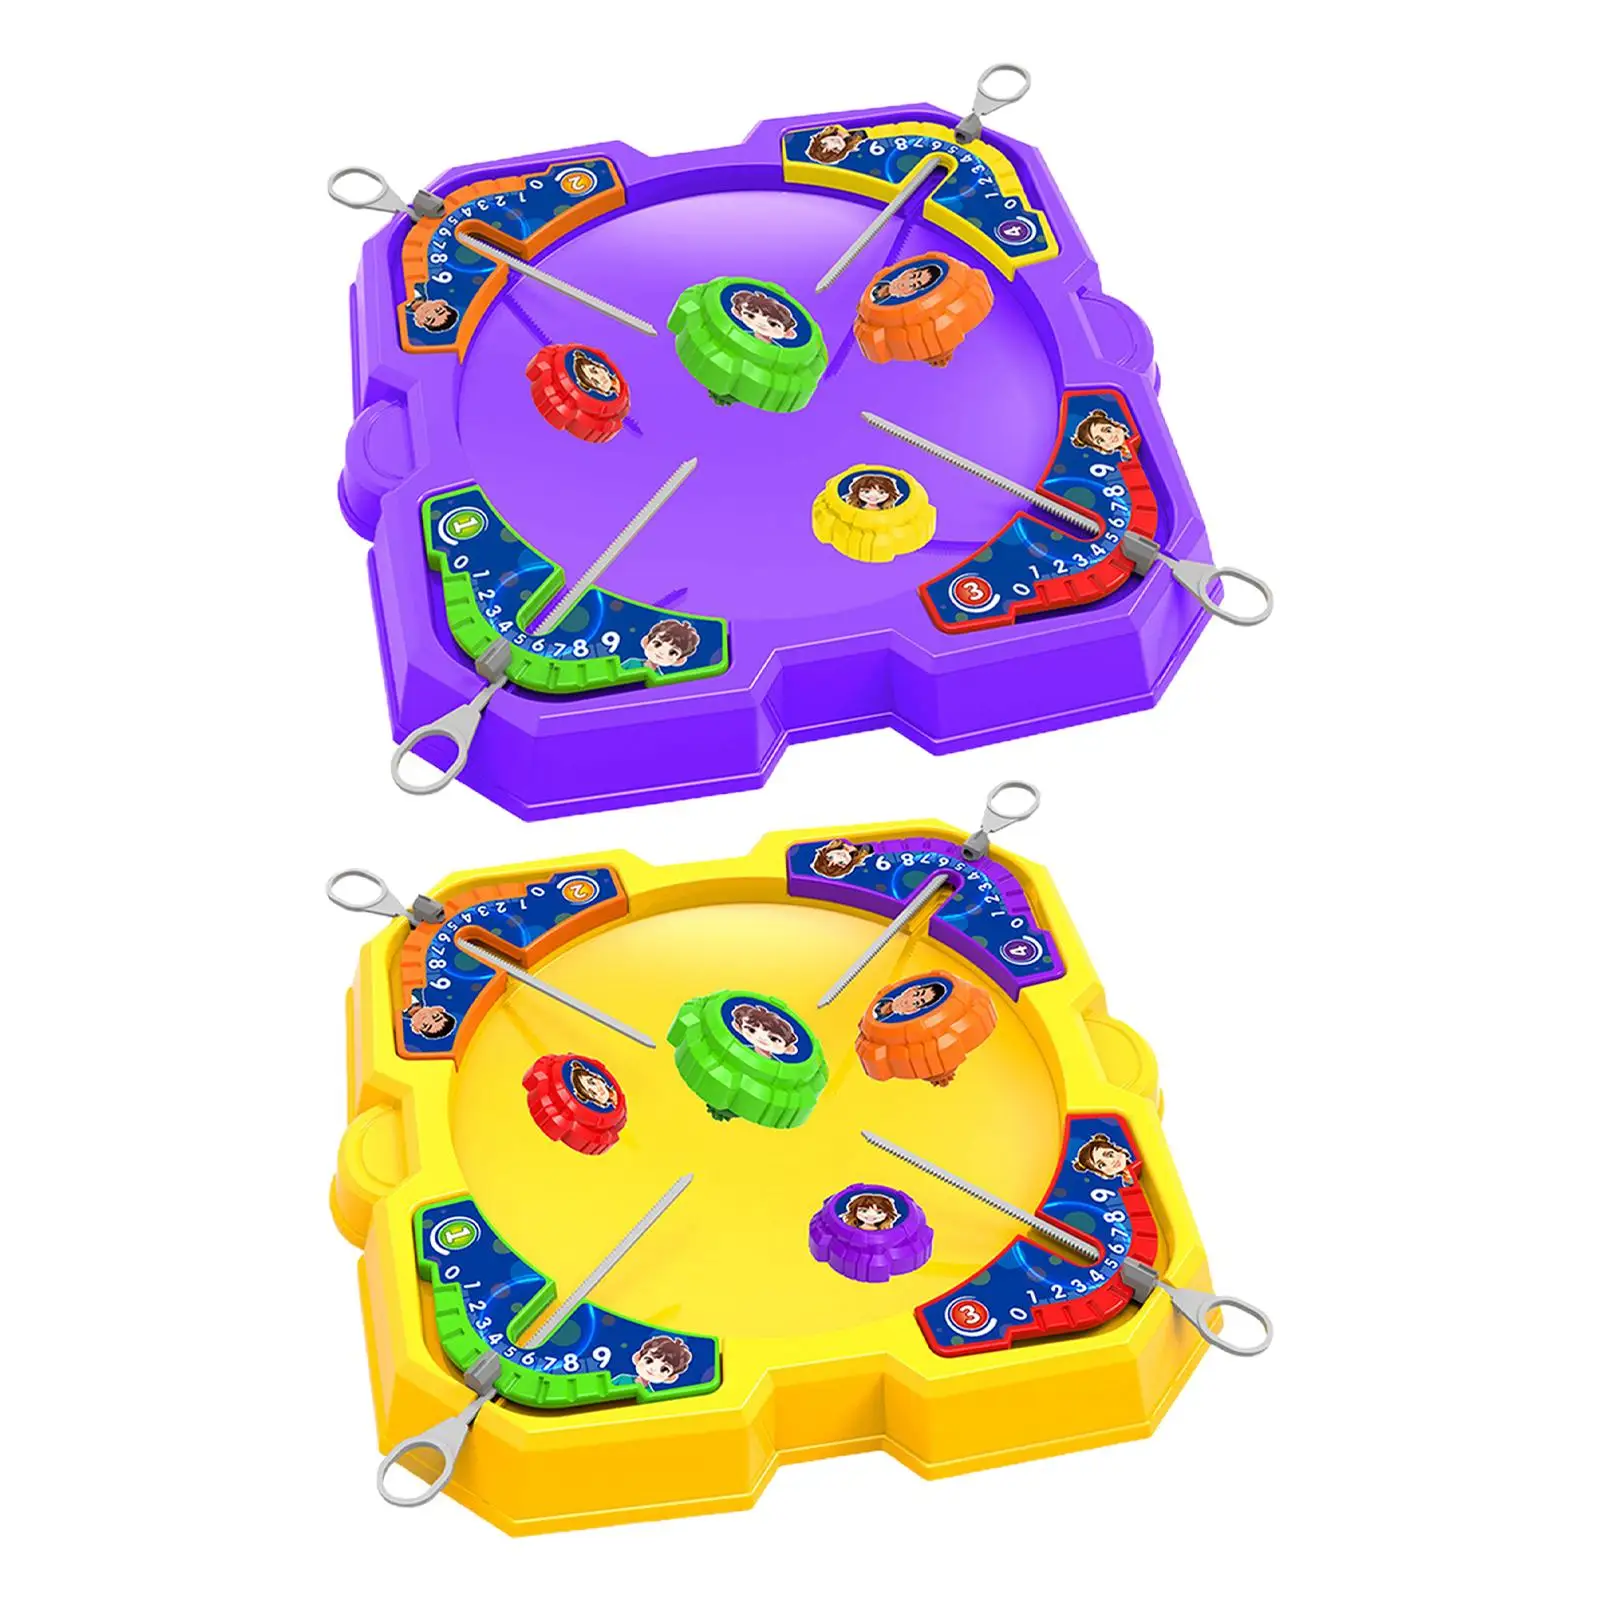 Gyro Playset Foursome Battling Game Gifts for Preschool Parties Desktop